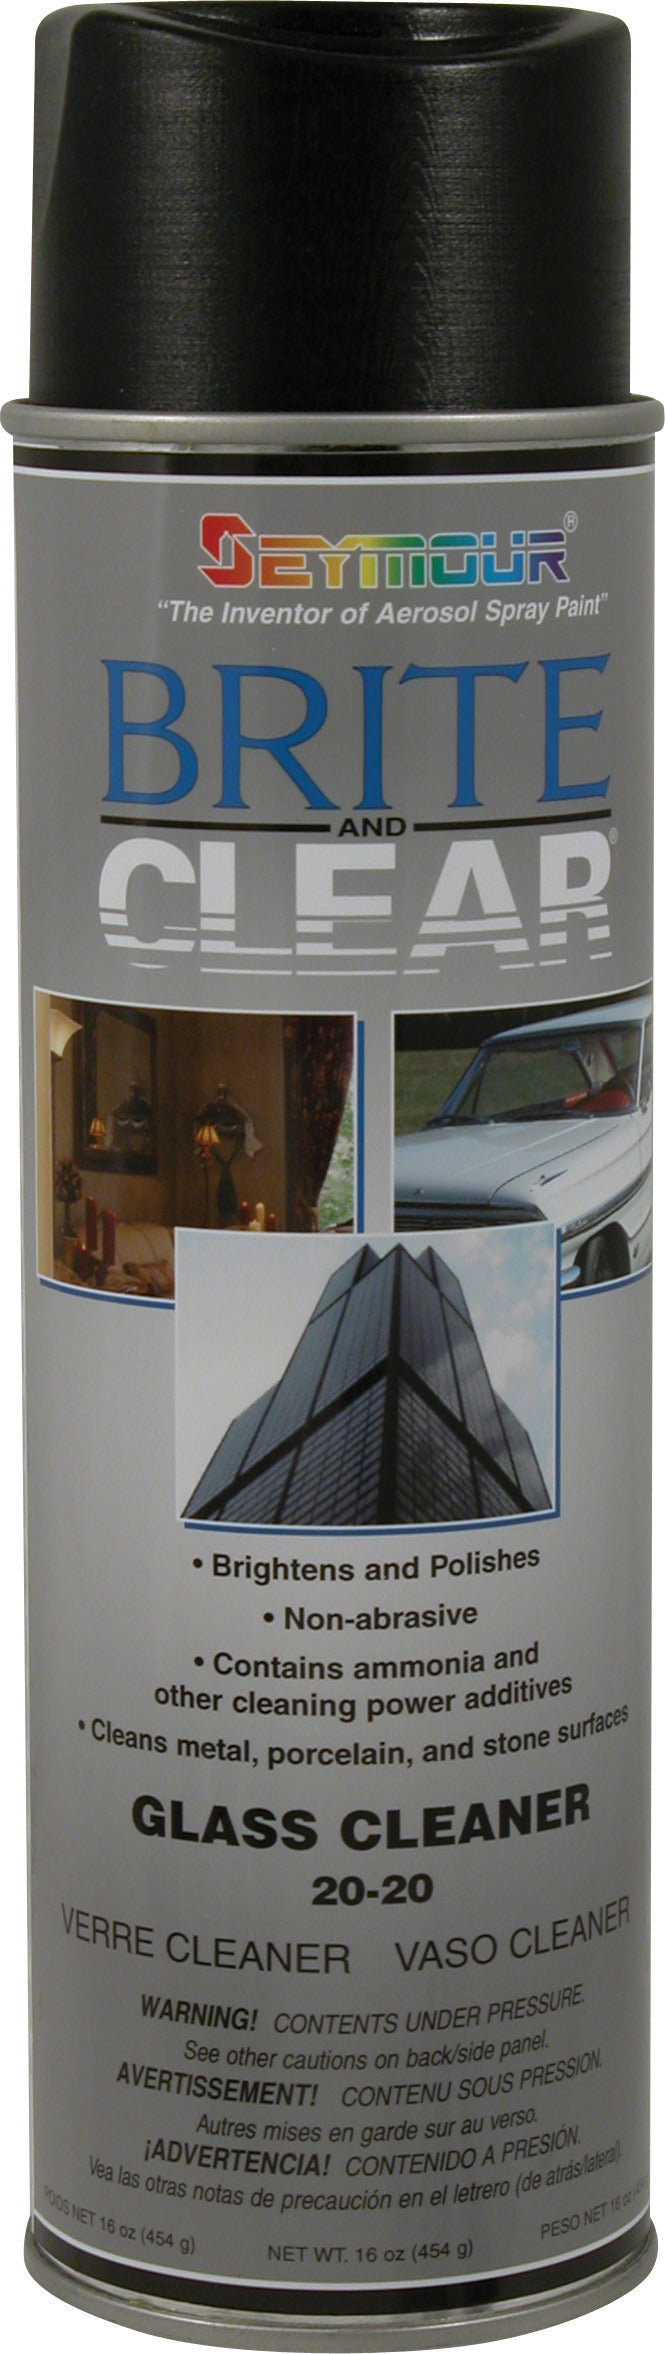 #20-20 Seymour Brite and Clear Glass Cleaner 16oz